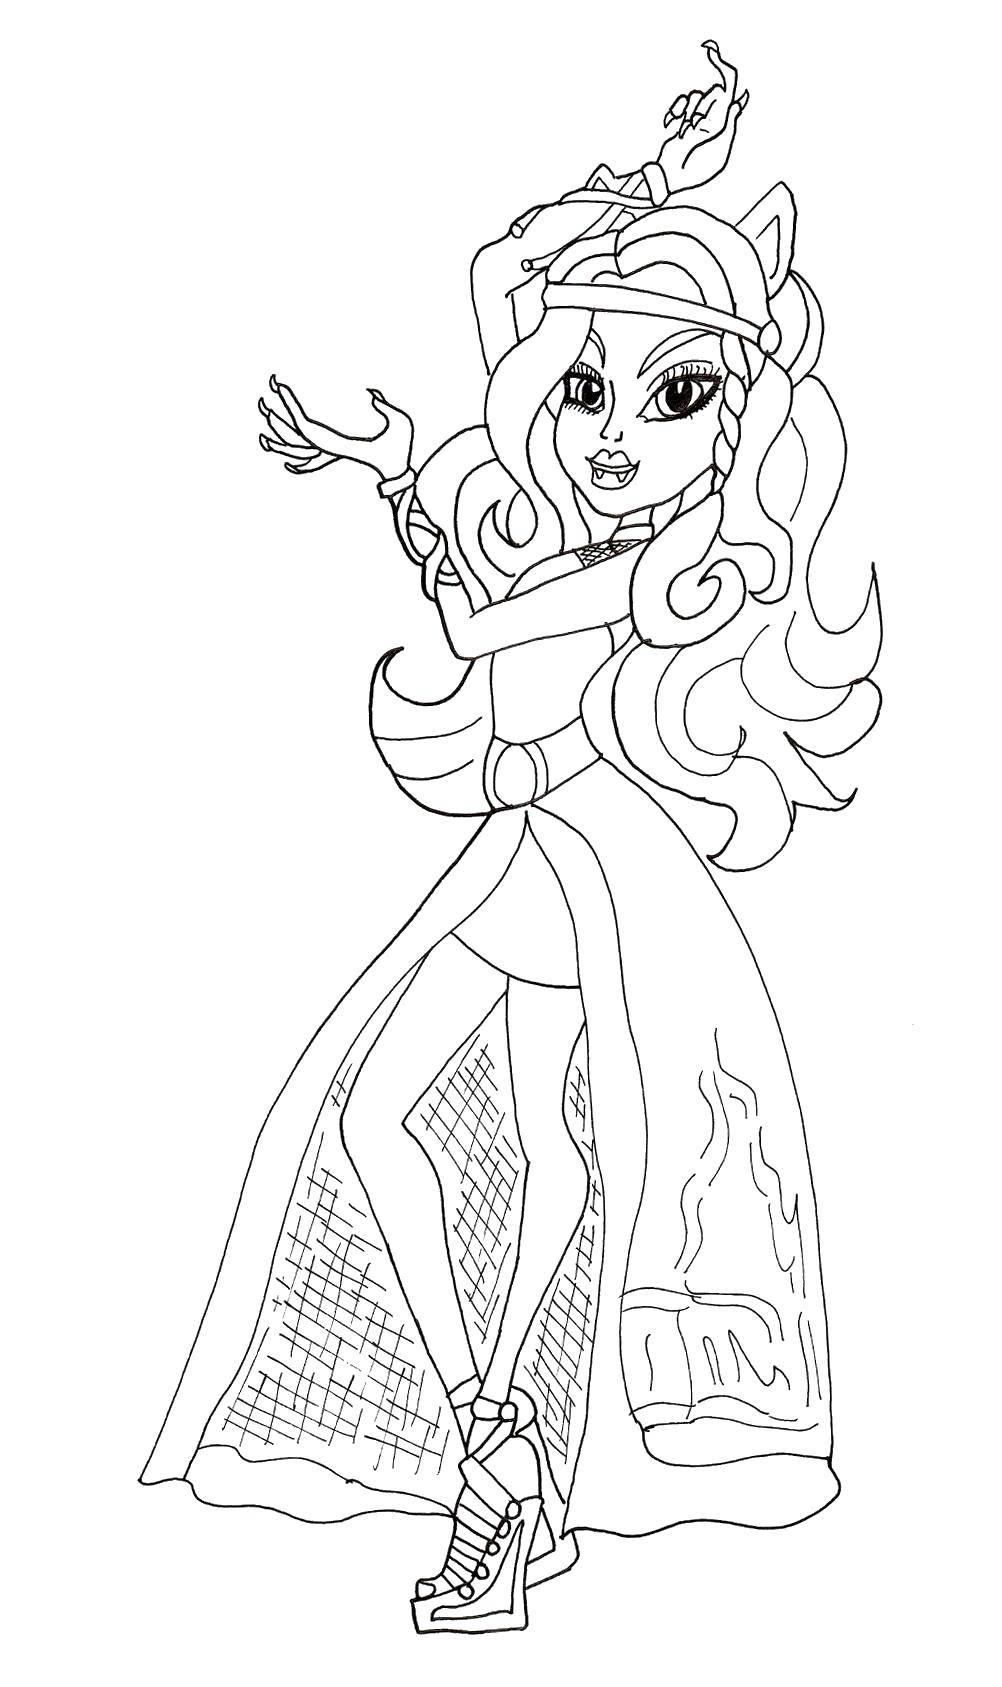 Coloring Girl in beautiful dress. Category school of monsters. Tags:  Monster High.